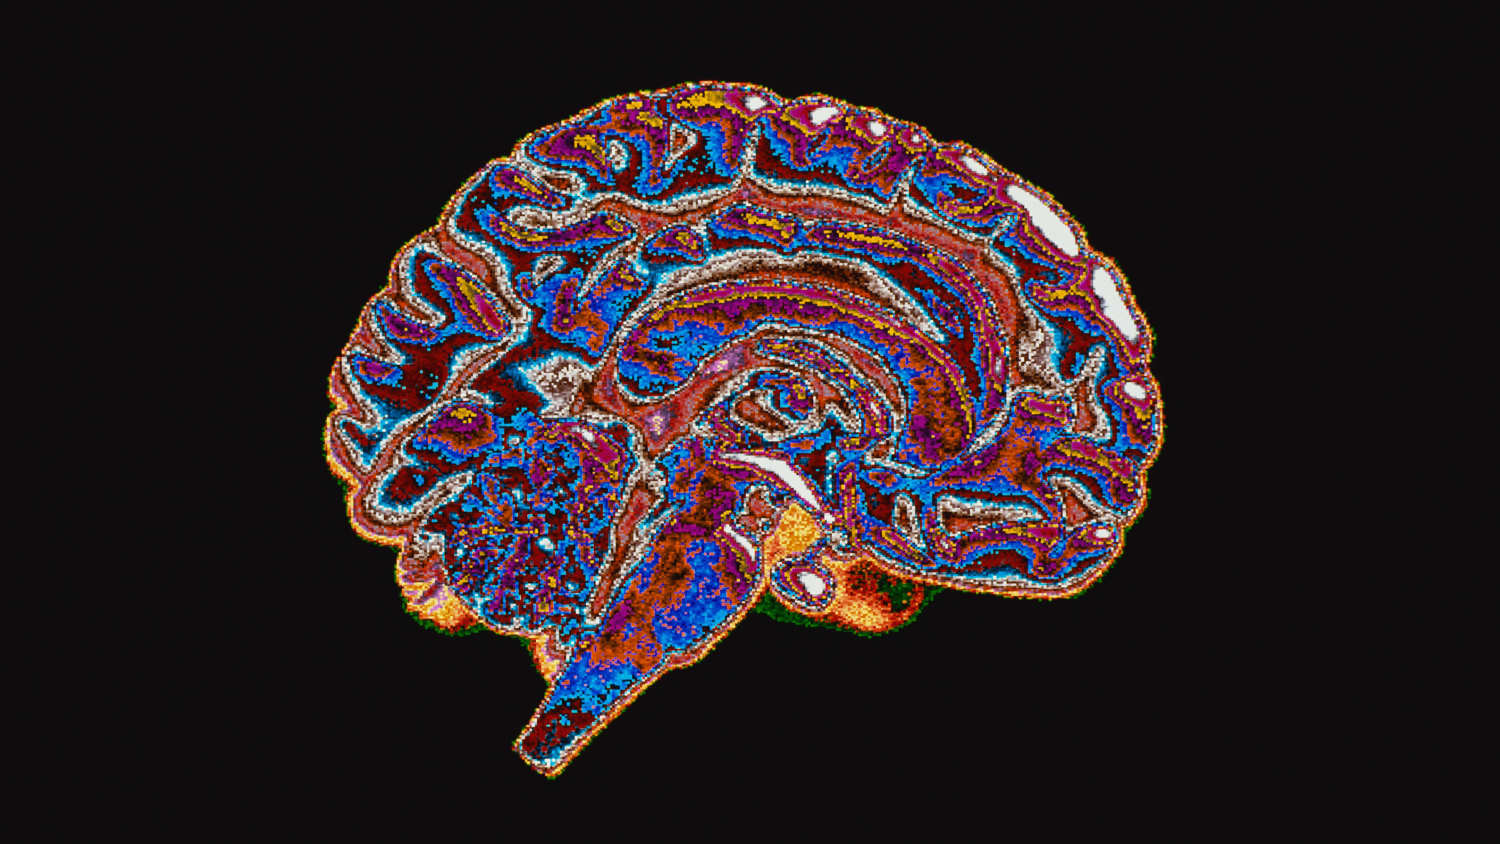 scan of a brain, representative of issues related to normal pressure hydrocephalus